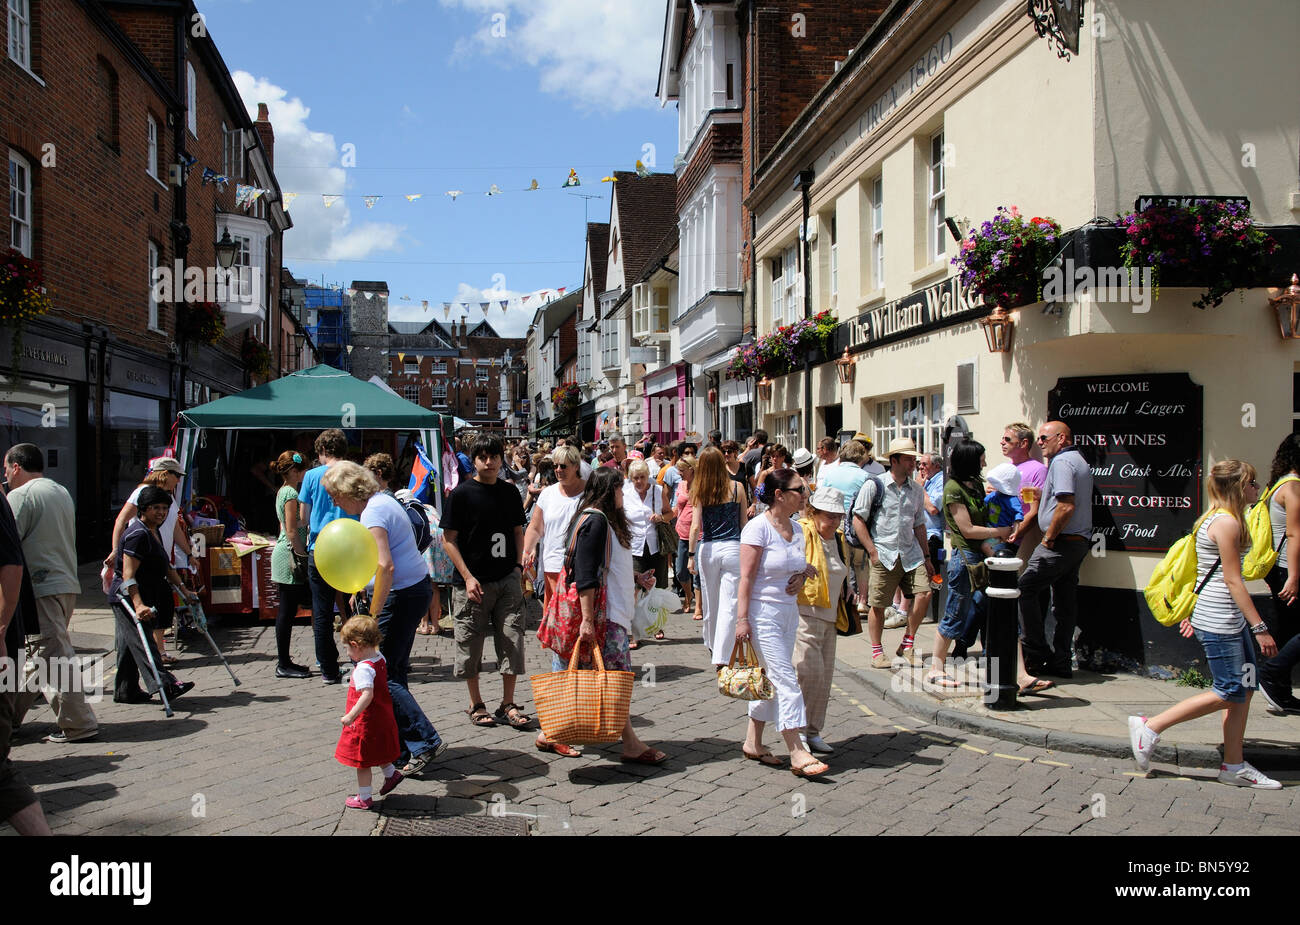 Winchester Hat Fair an annual event Winchester Hampshire UK crowded street with market stalls and a public house Stock Photo